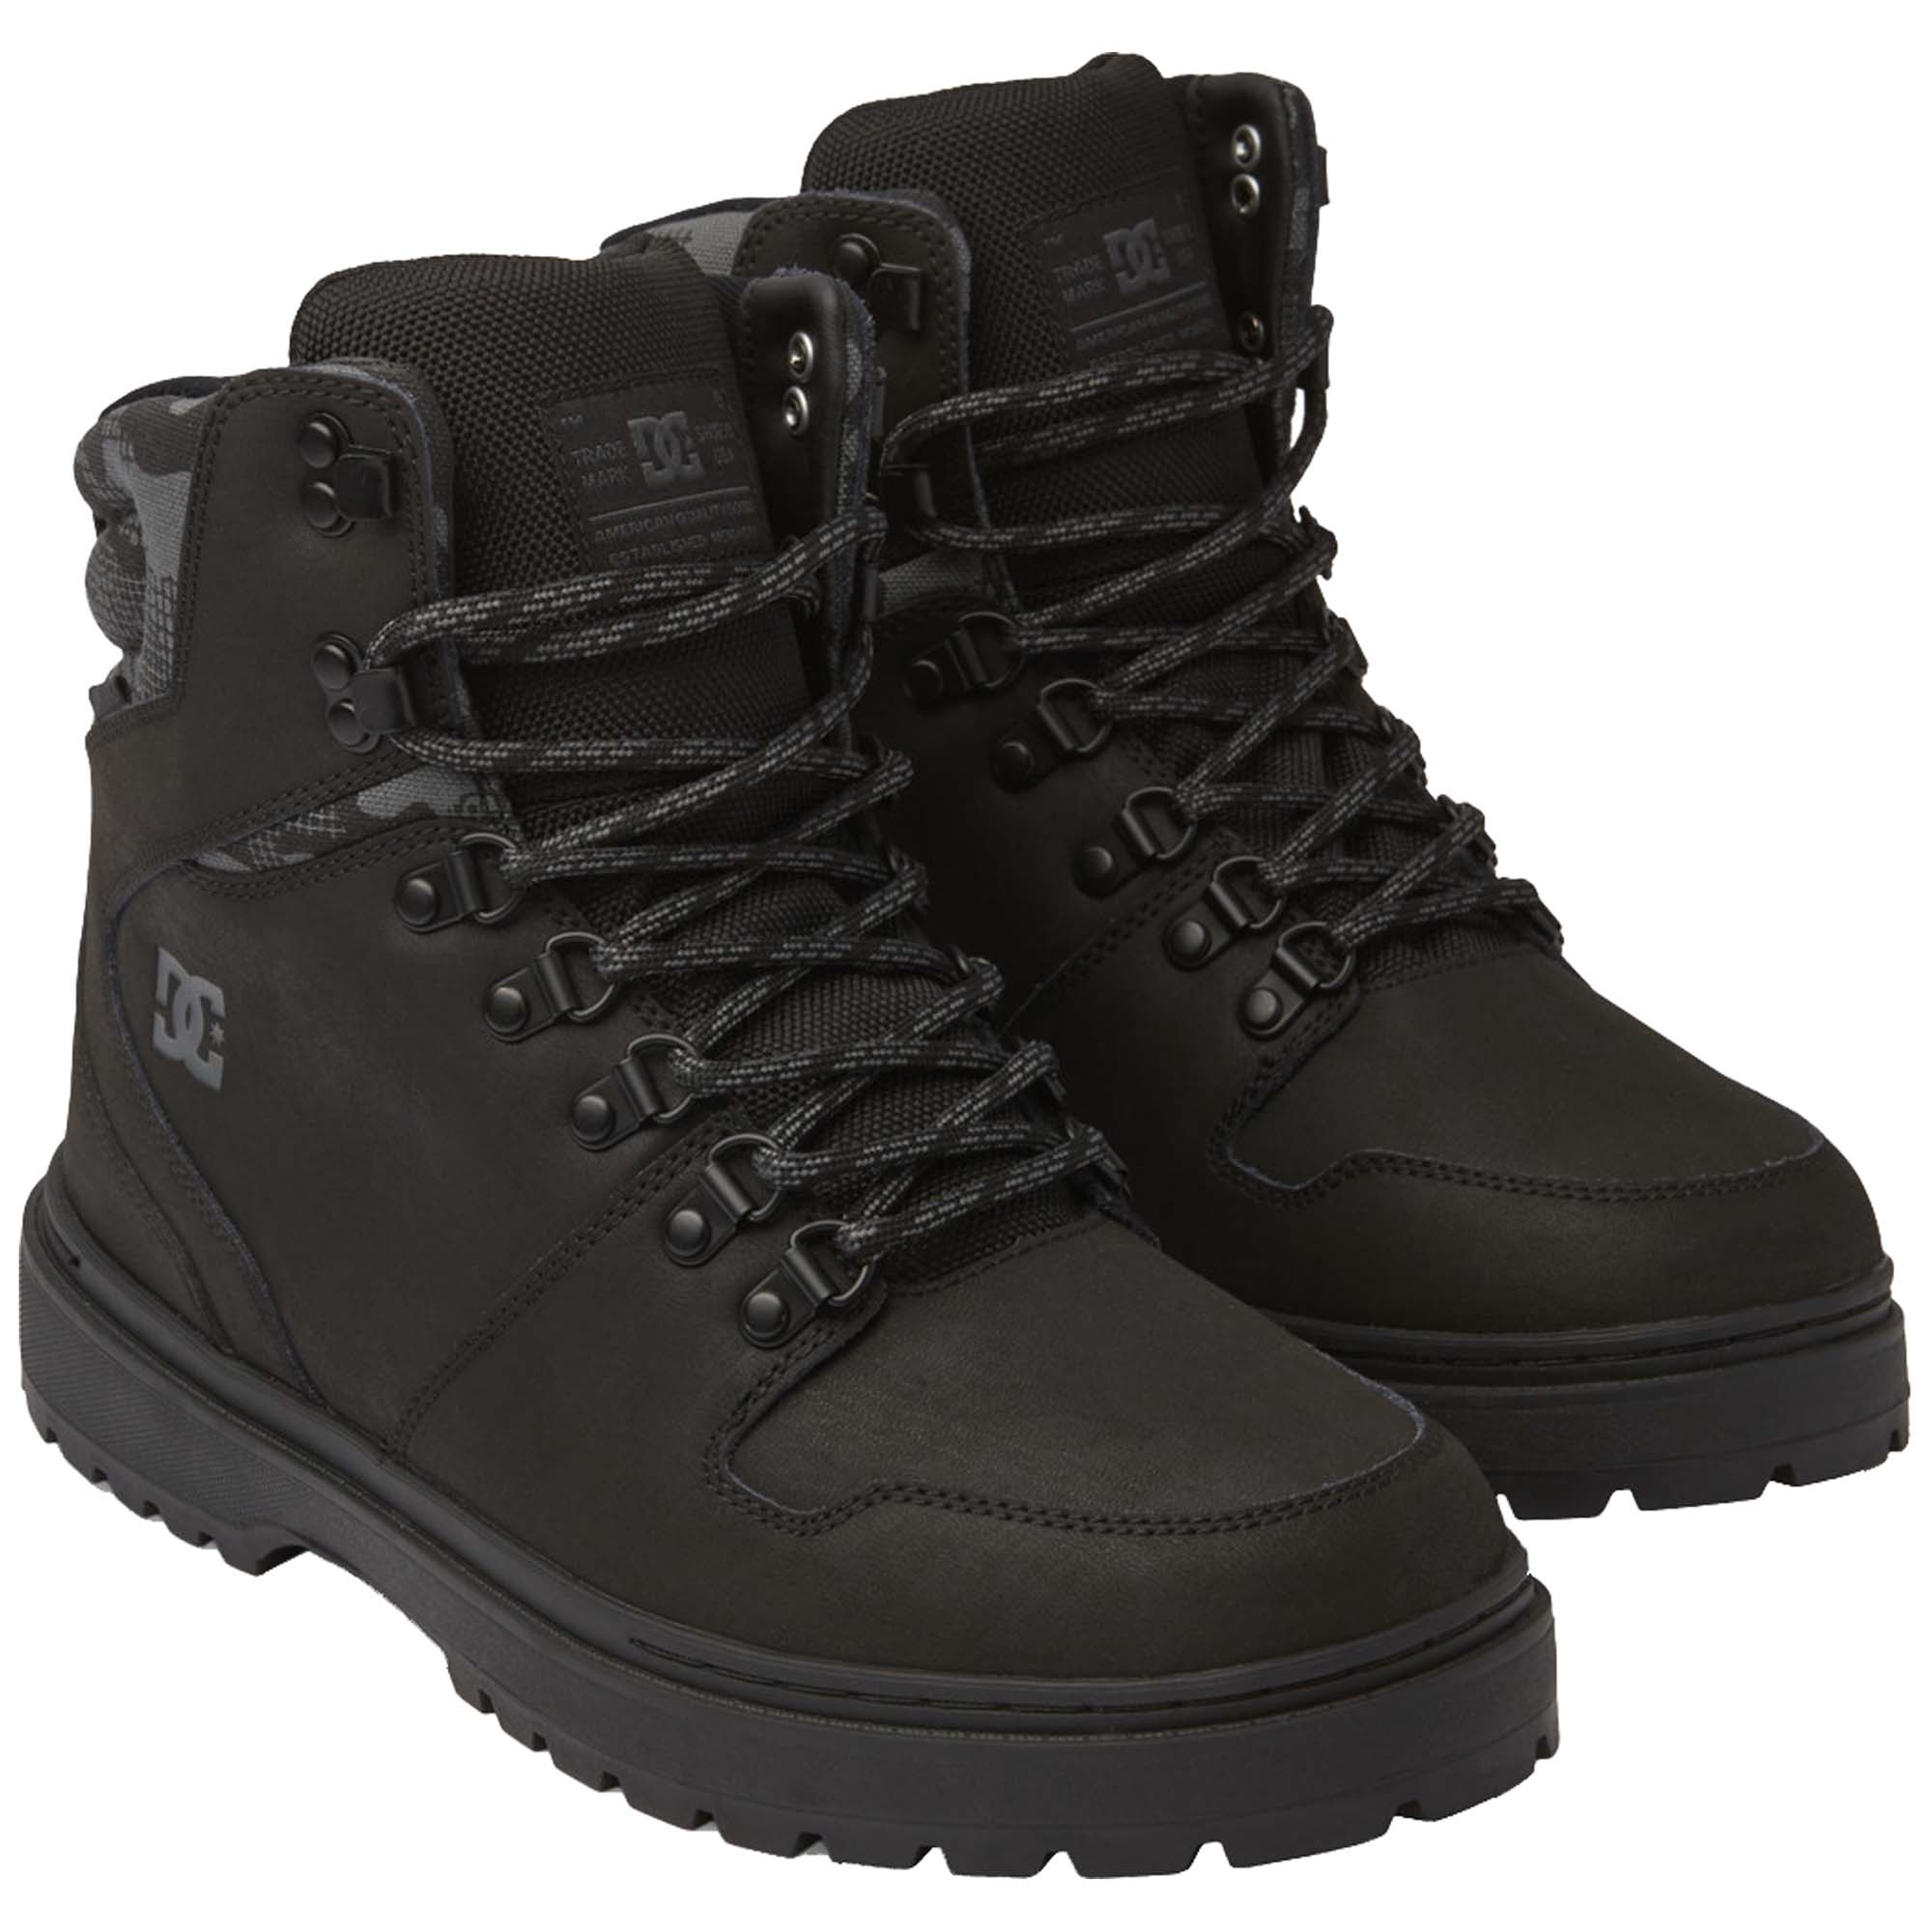 DC Peary Men's Winter Boots